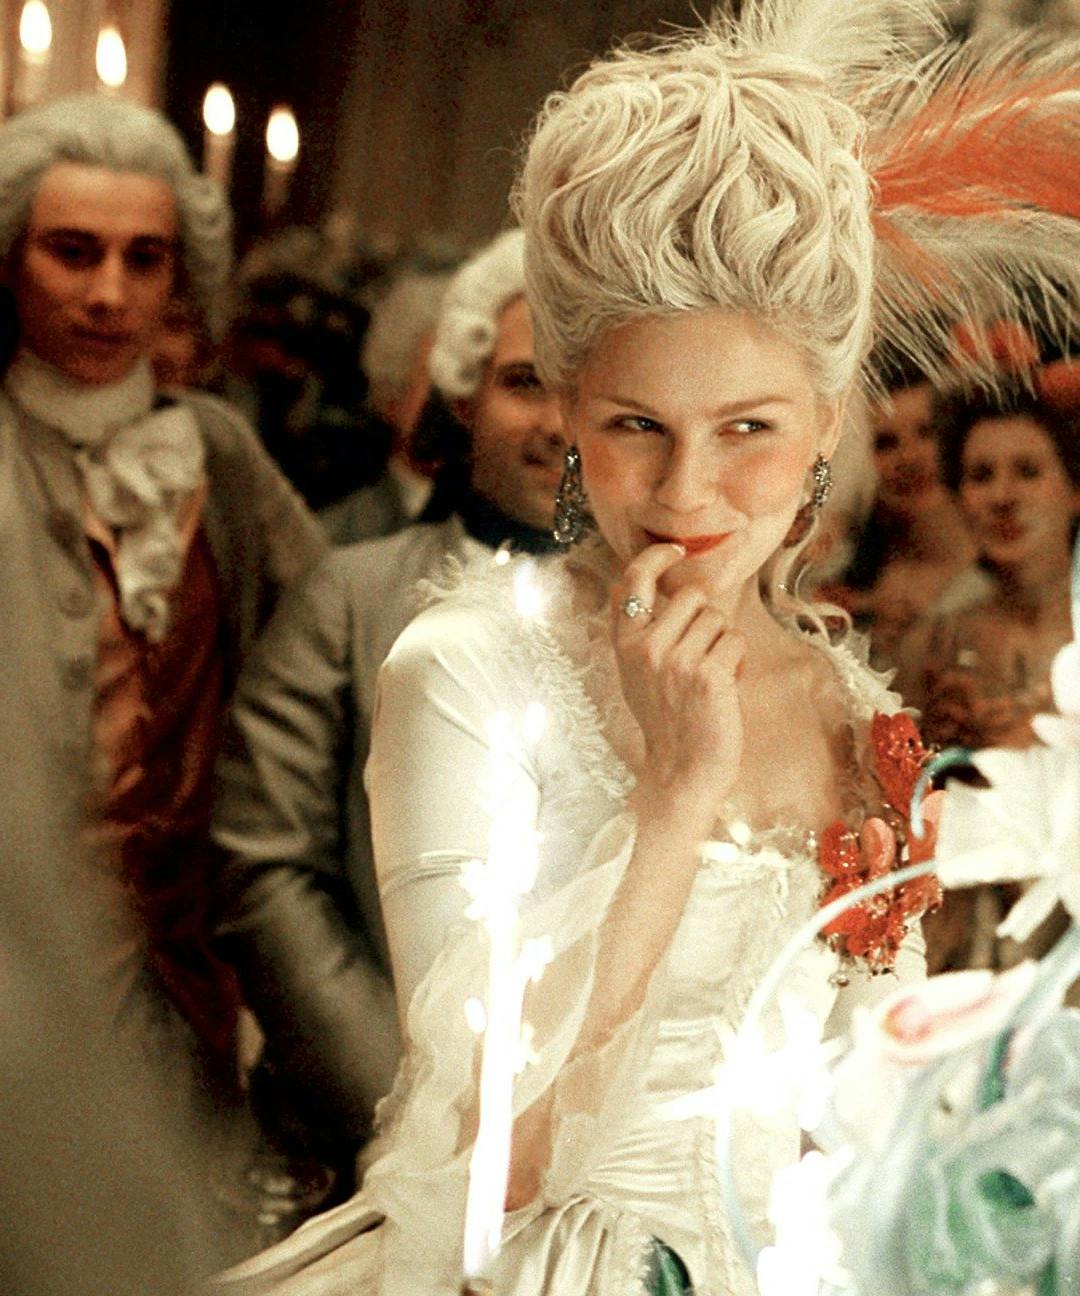 How Marie Antoinette Went From The Most Hated Queen Of France To A Pop-Culture Icon